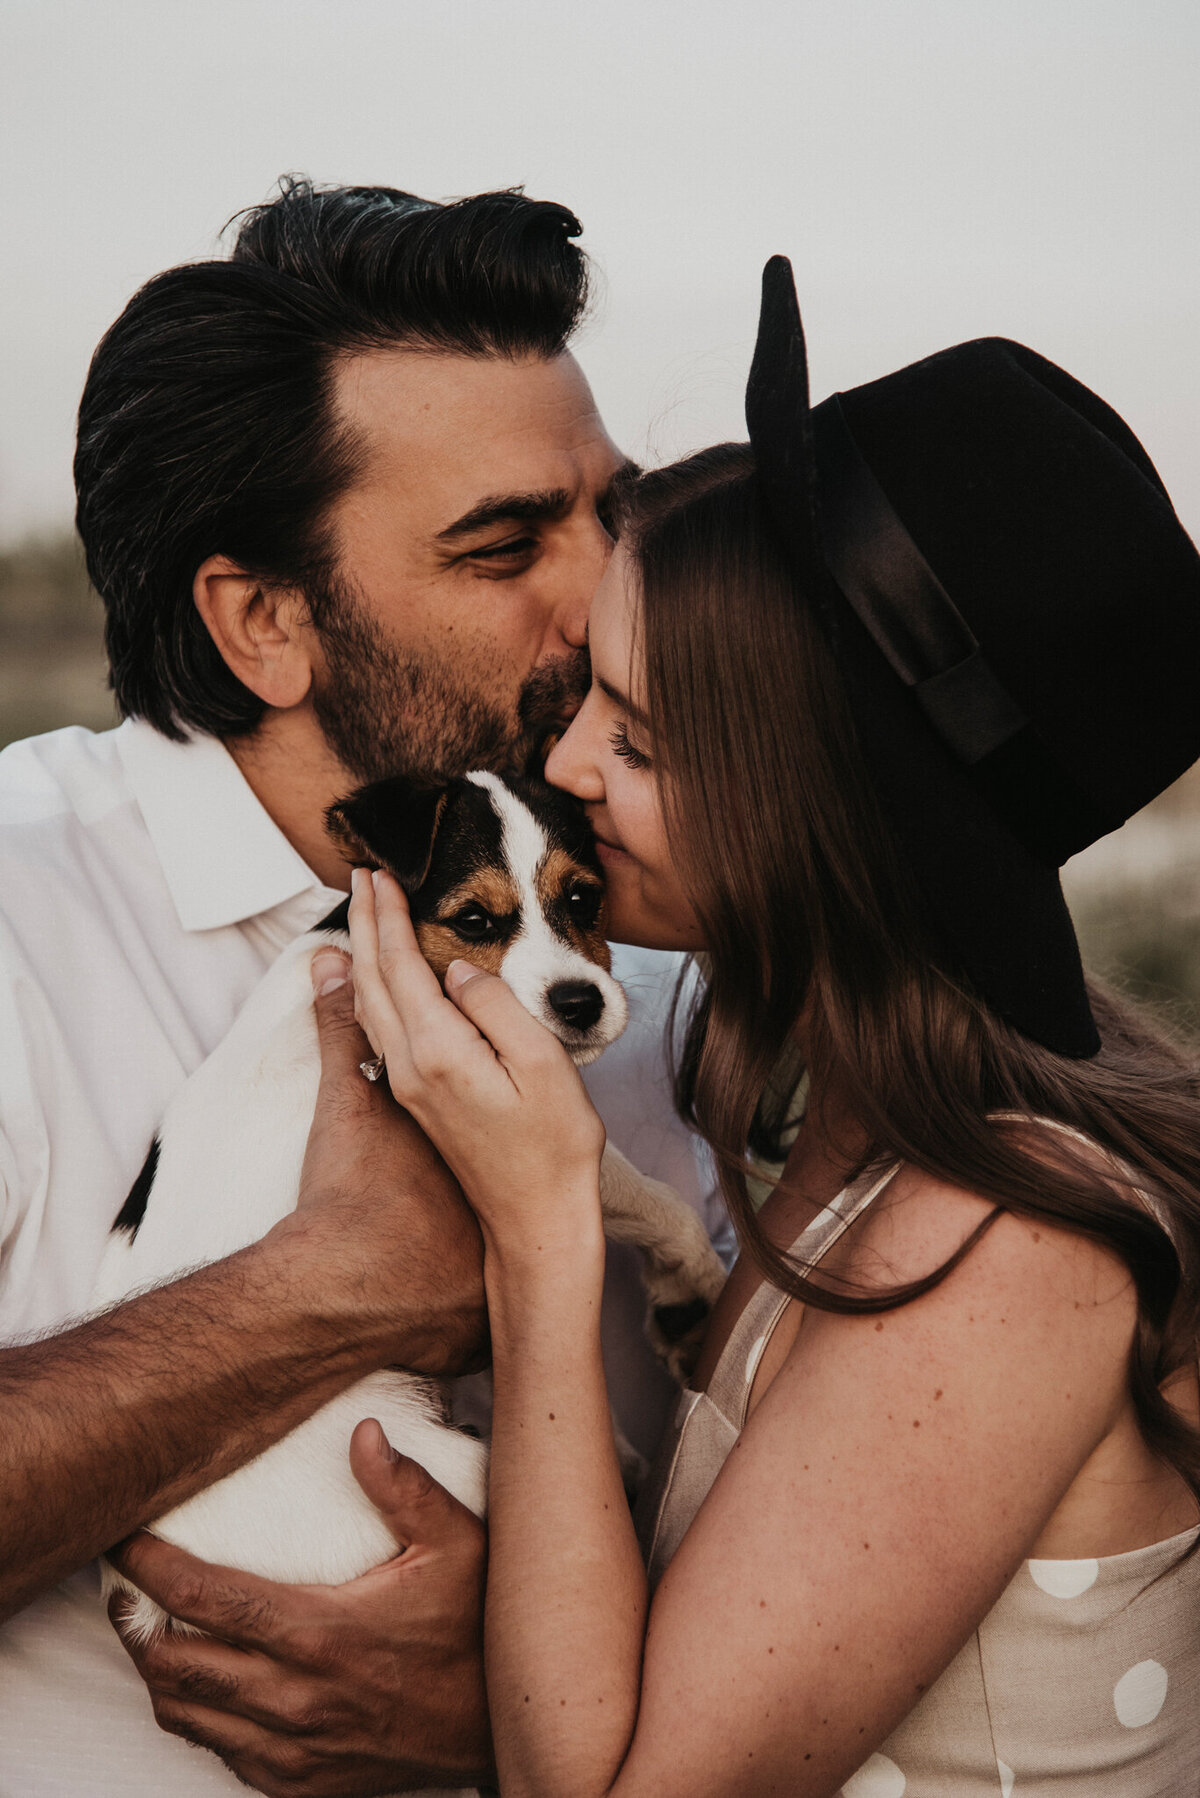 Adorable engagement session inspiration, trendy, modern couple snuggling with dog, captured by Kelsey Vera Photography, intimate and romantic wedding photographer in Airdrie, Alberta. Featured on the Bronte Bride Vendor Guide.